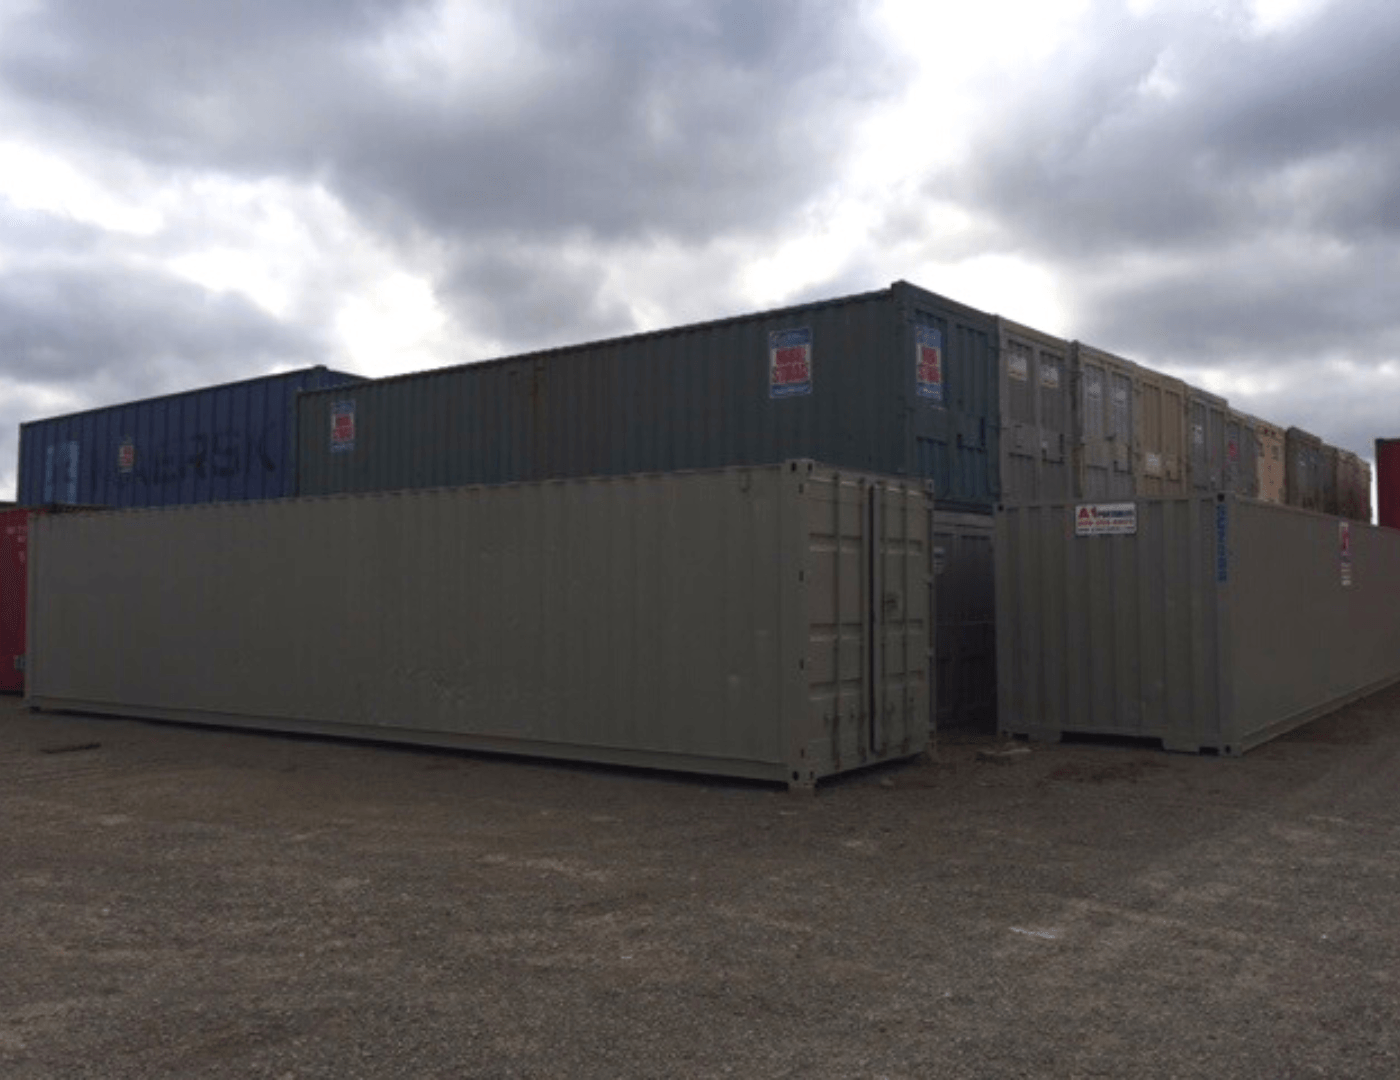 Storage Containers, Portable Storage Containers, Shipping Containers, Sea Crates, Conex Boxes, near Lexington, Kentucky (KY)